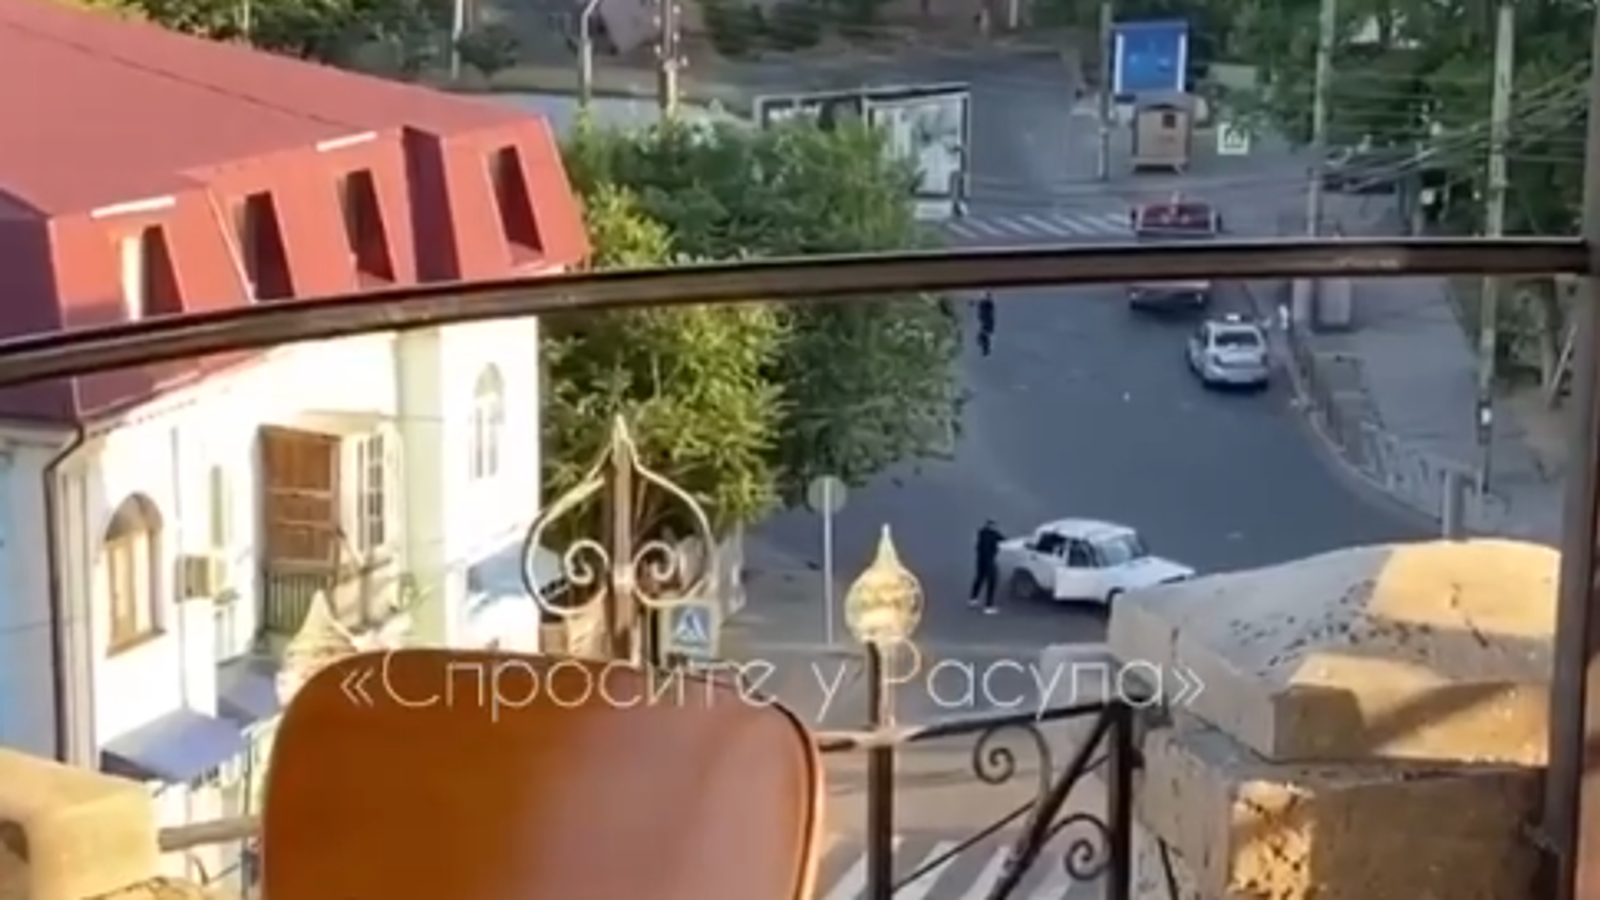 Russia: Gunmen open fire on synagogue and church in deadly shootings in Dagestan region